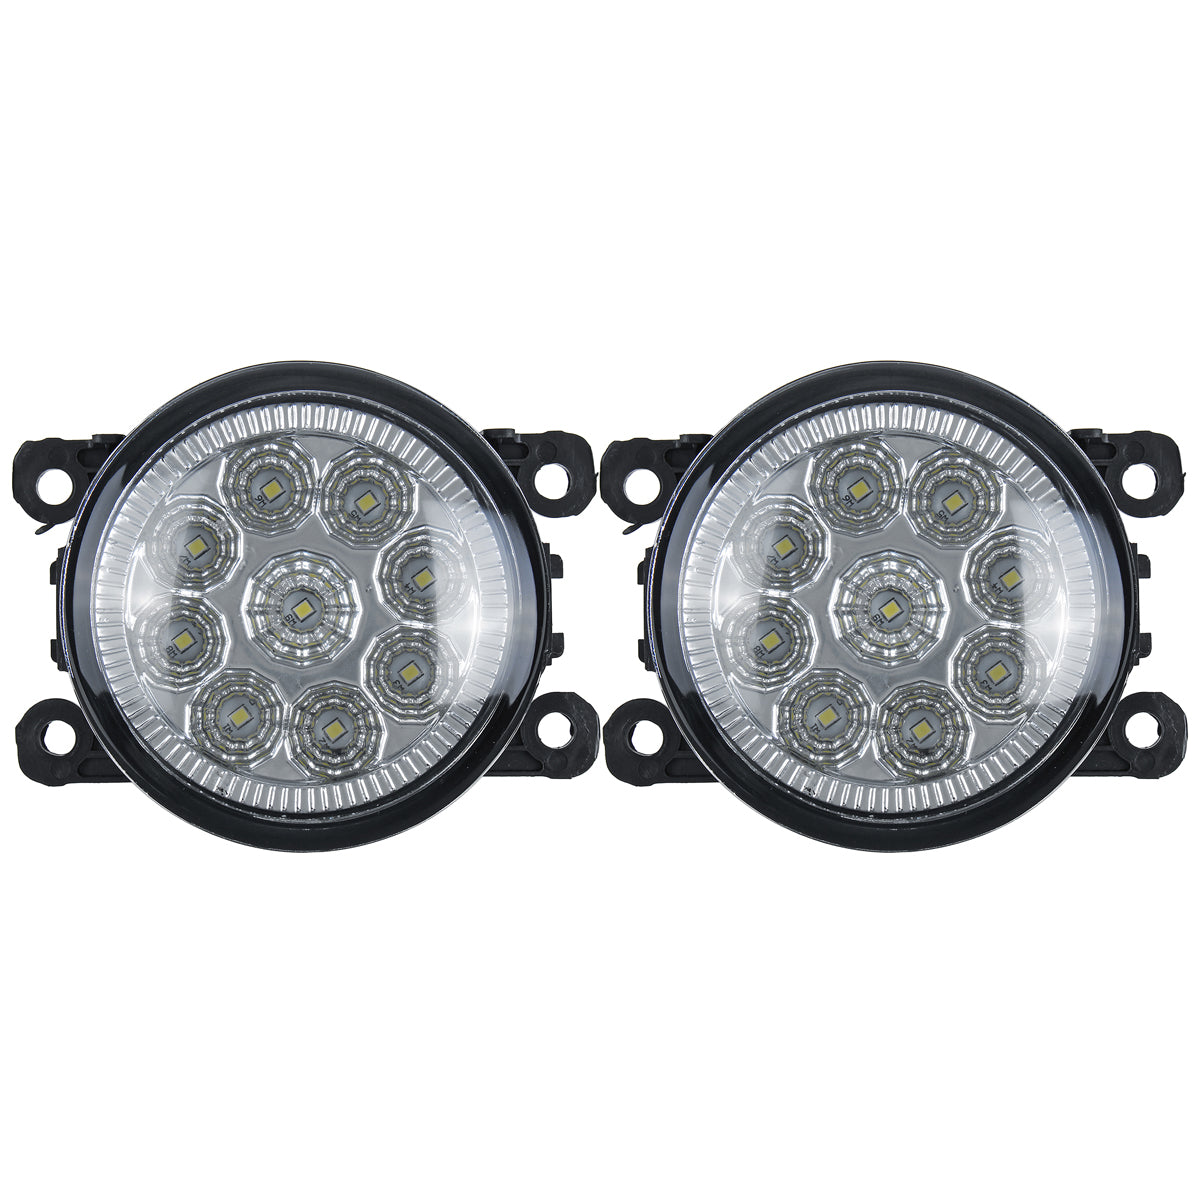 Slate Gray Pair Car Front LED Fog Lights Lamps with H11 Bulbs White For Land Rover Discovery 4 Range Rover Sport L322